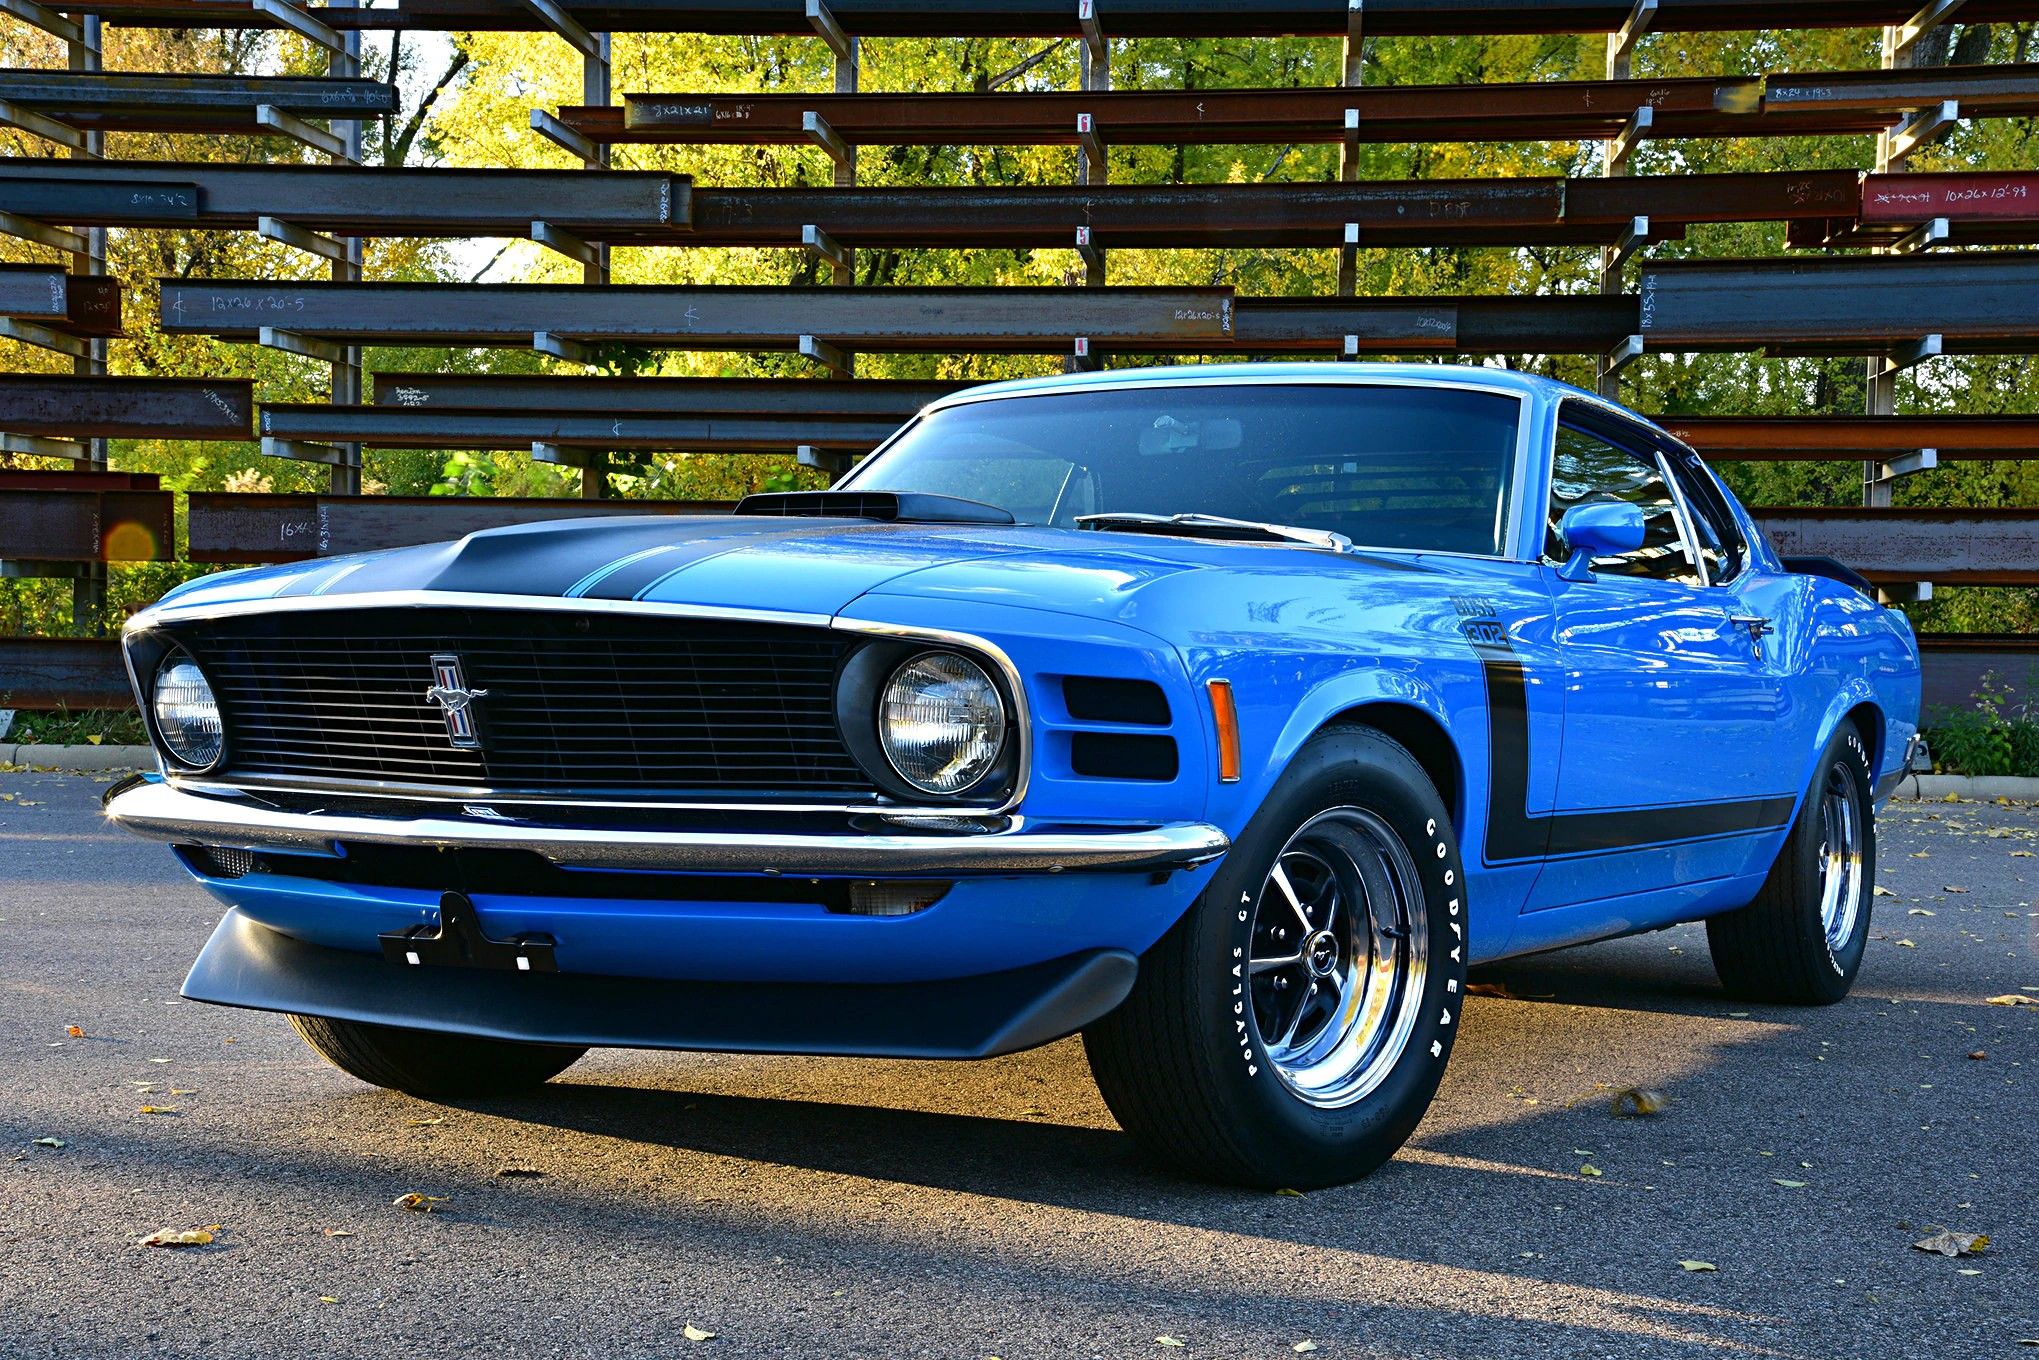 An Image Of A Blue 1970 Ford Mustang Boss 302